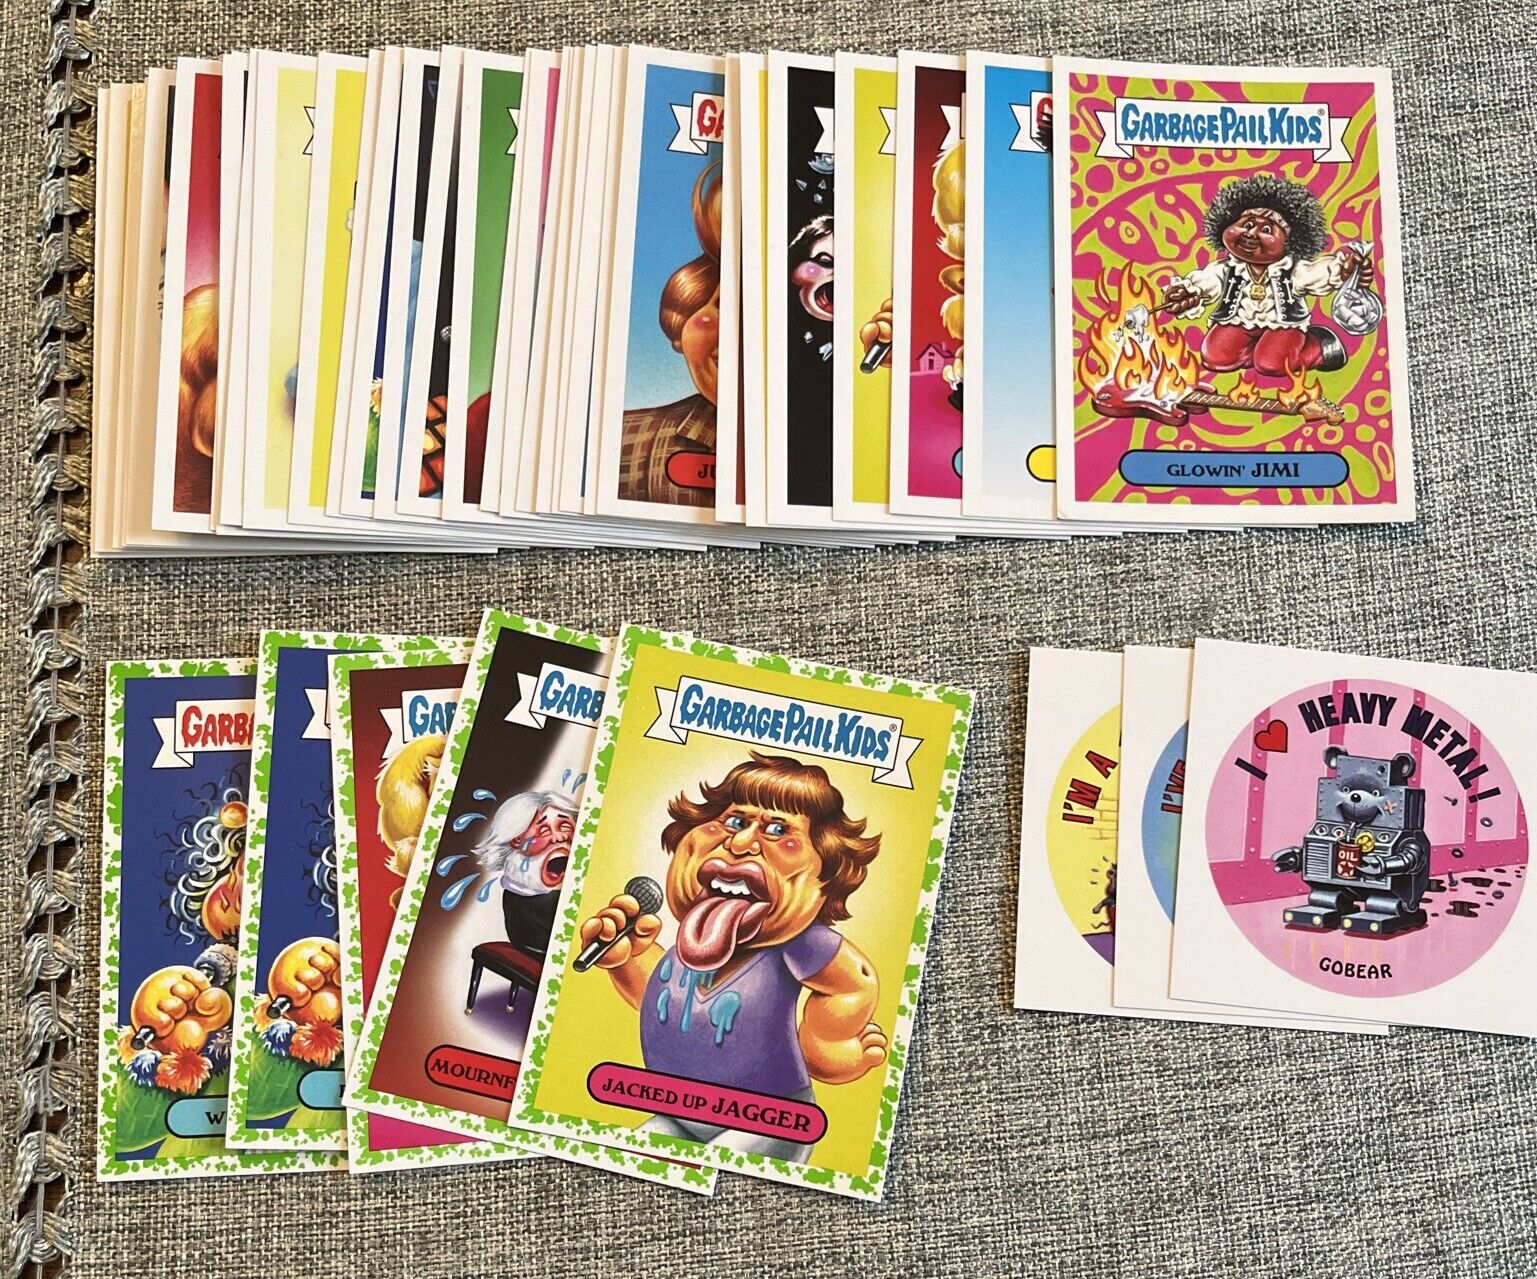 2017 Garbage Pail Kids Battle Of Bands 40 Card Lot With (3) Bear Stickers (read)